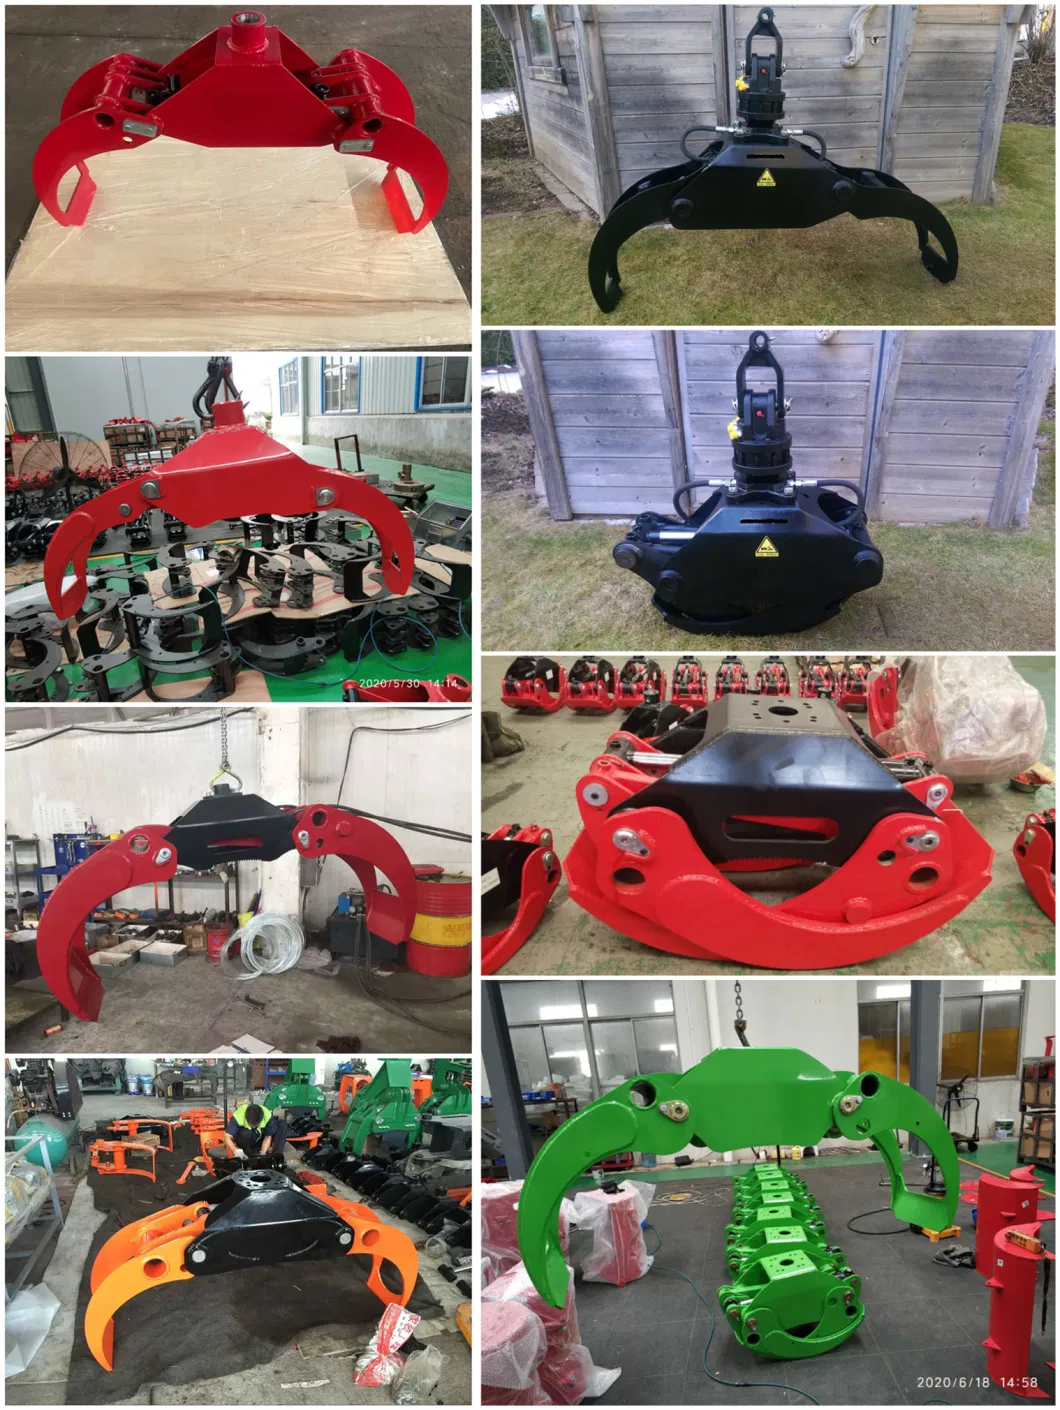 Excavator Hydraulic Clamp, Rotating Grapples, Log Grab for Excavator